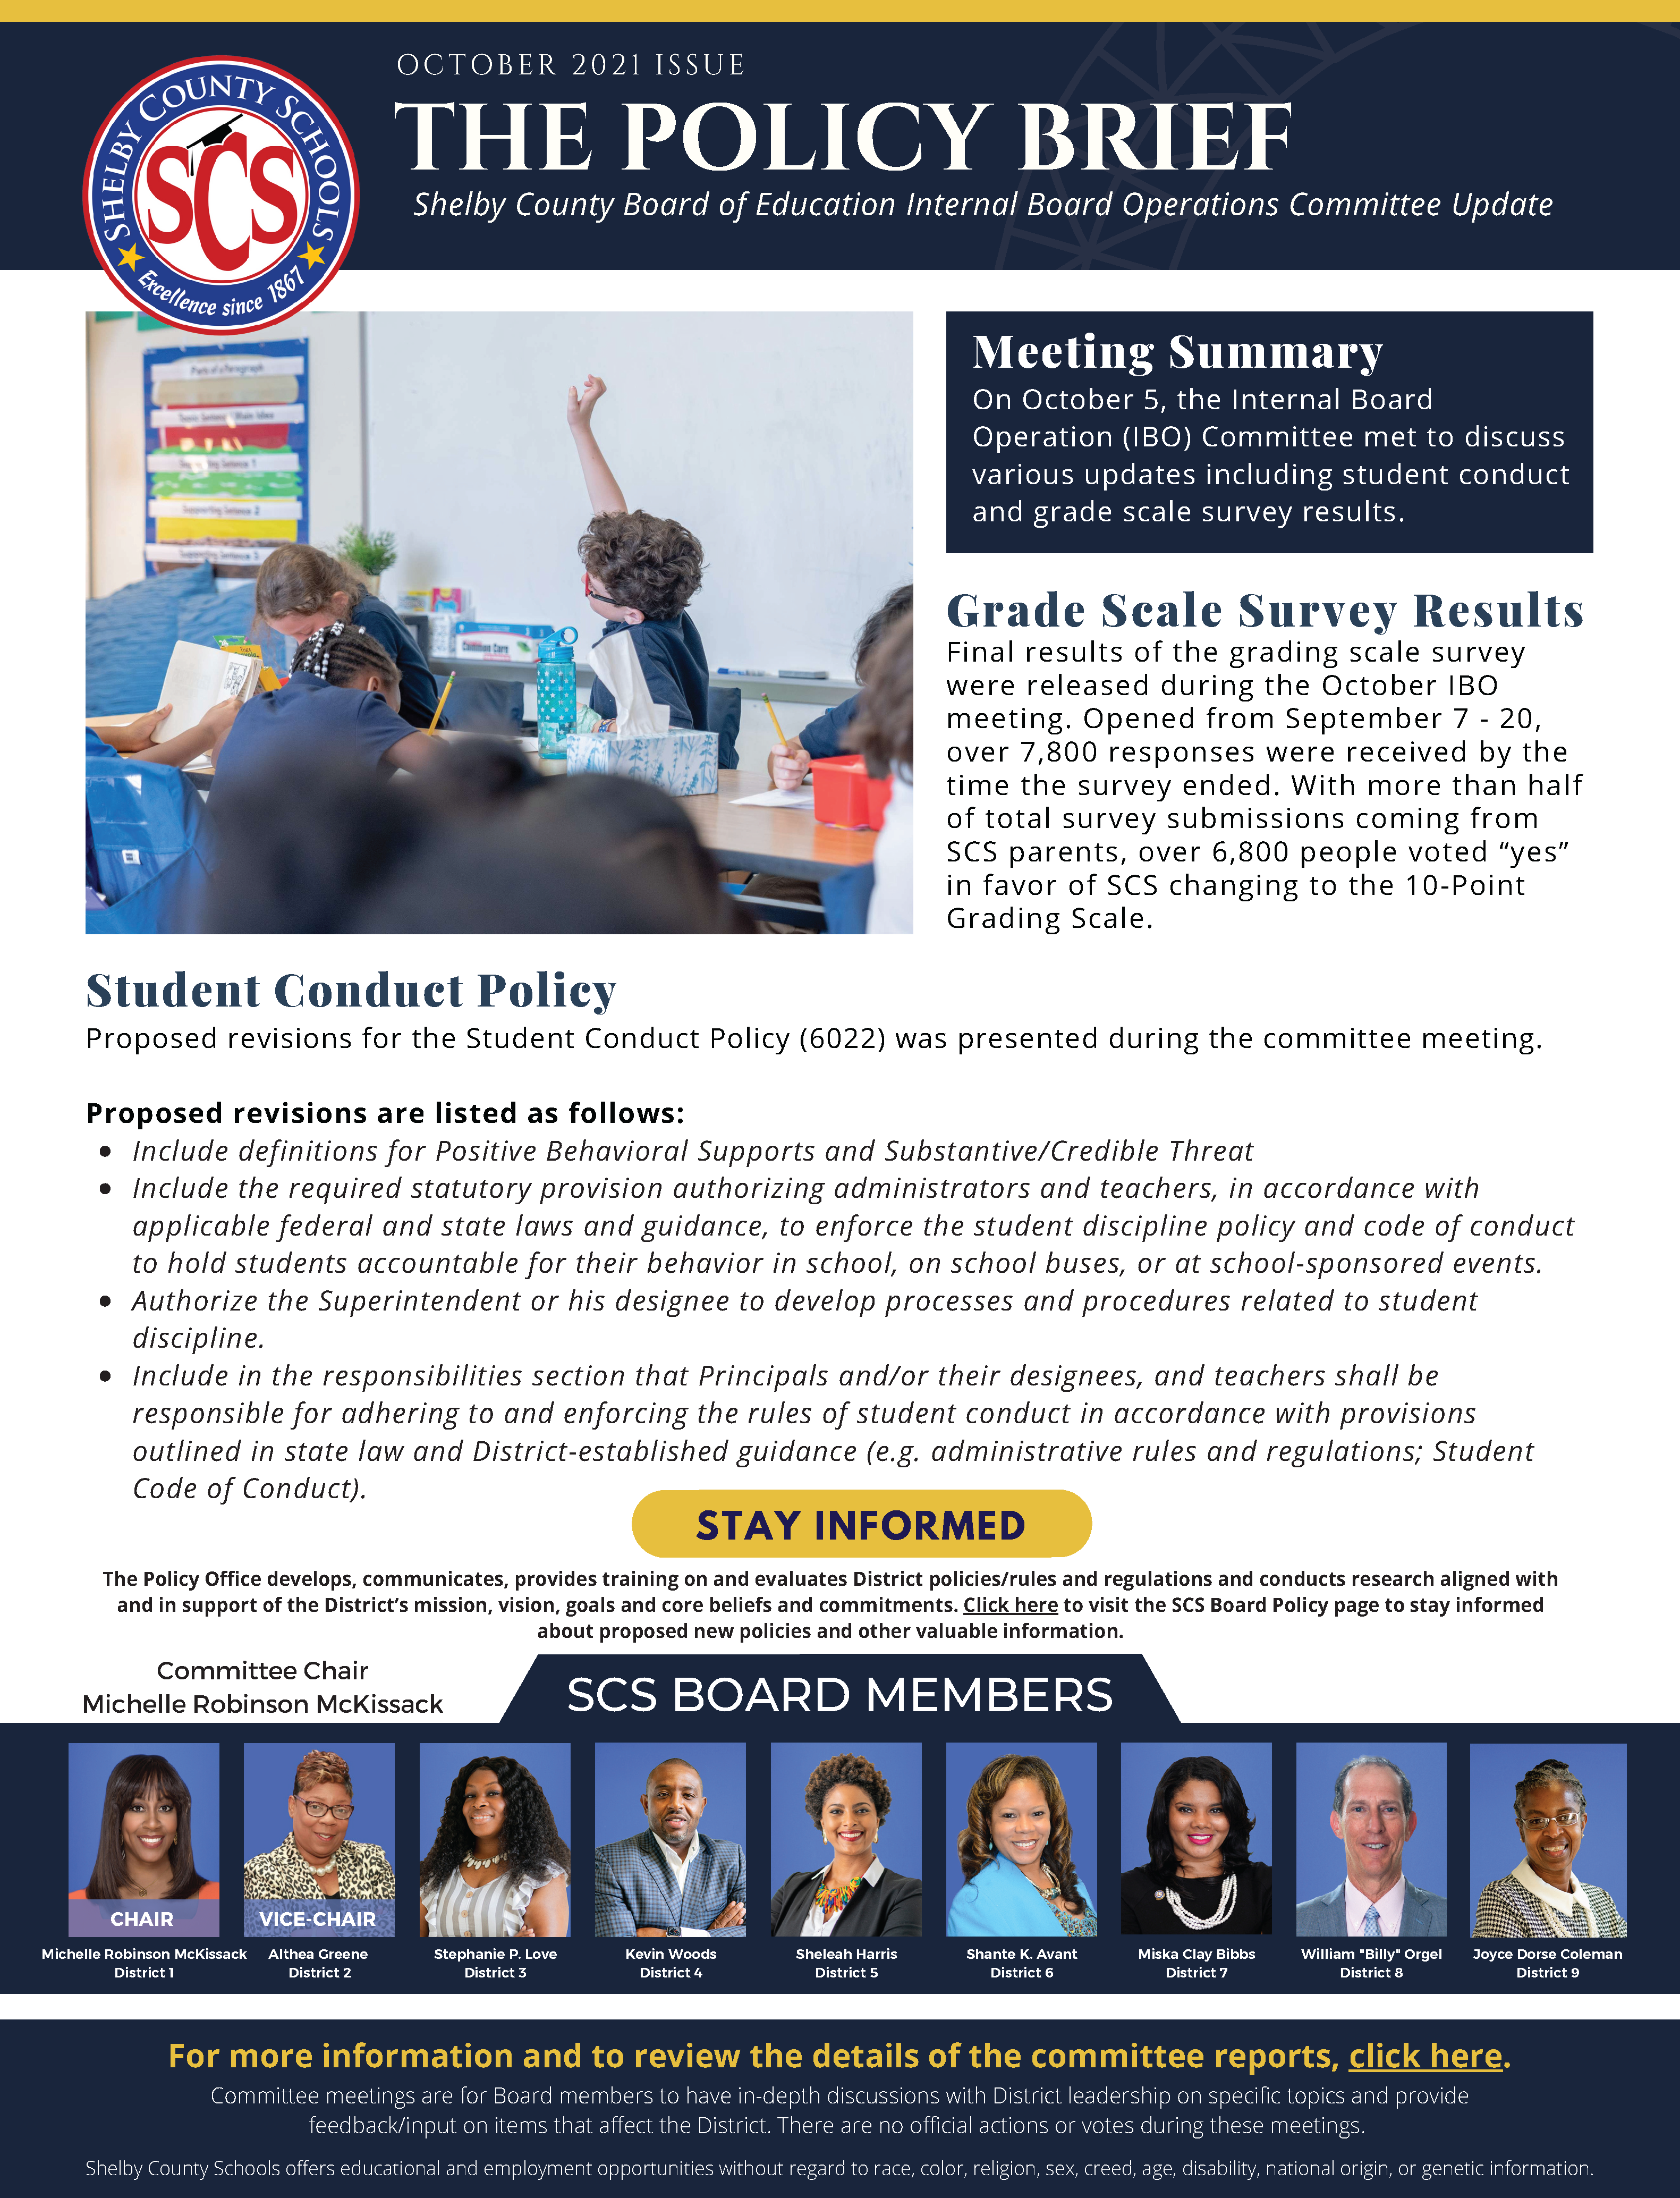 The Policy Brief (Internal Board Operations Committee Newsletter) October 2021